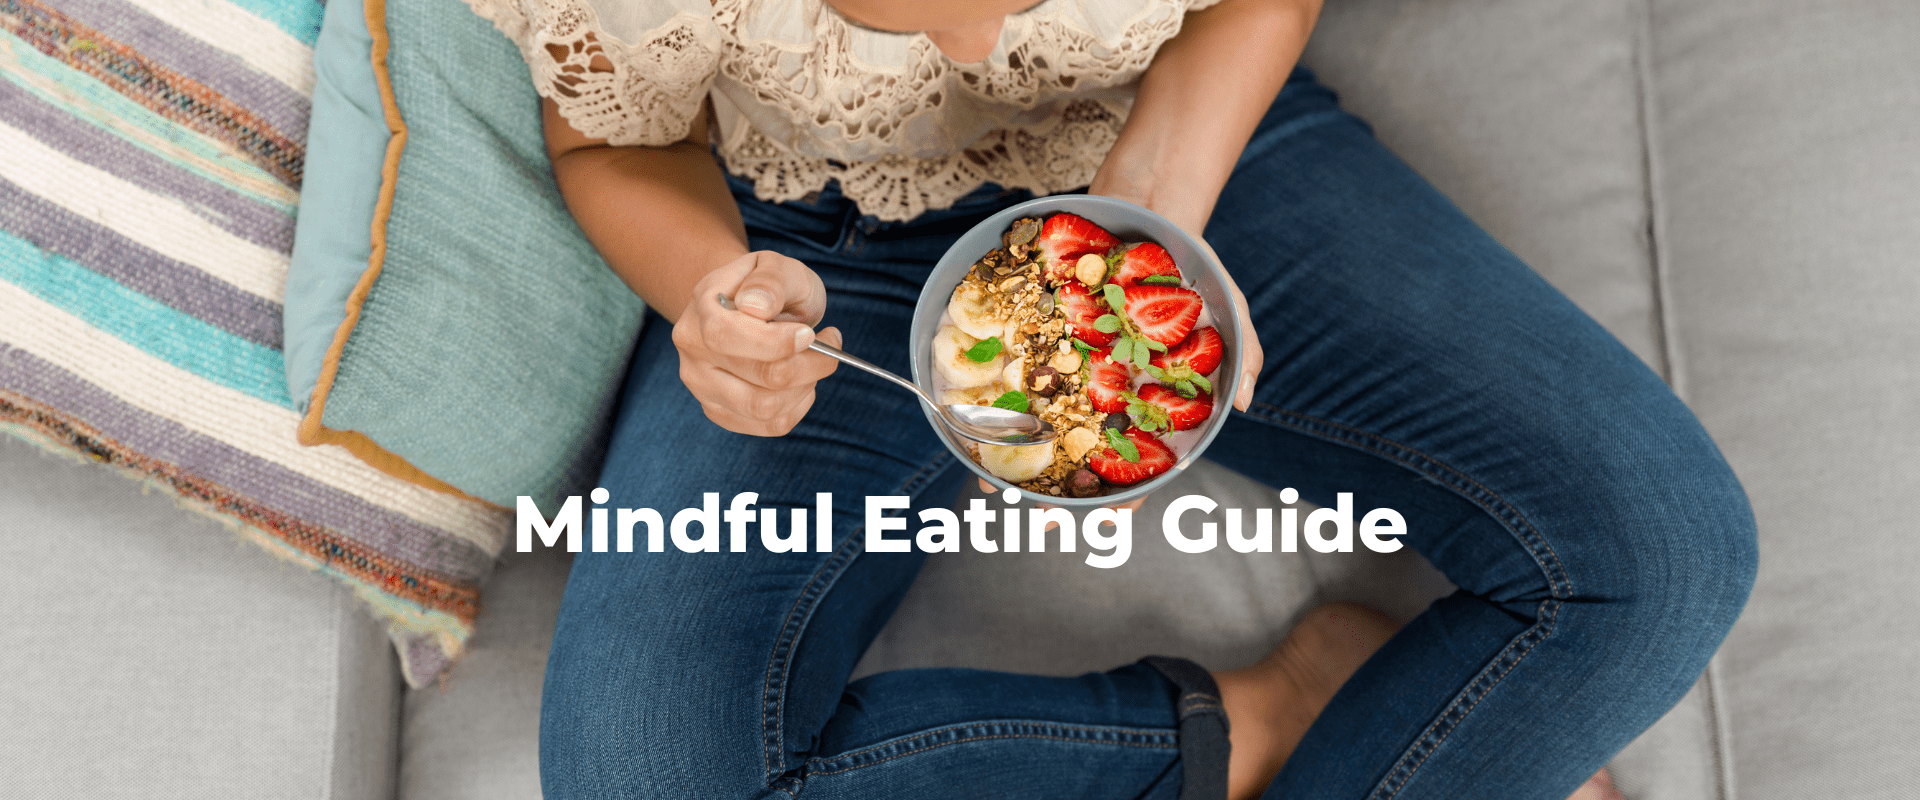 Mindful Eating Guide